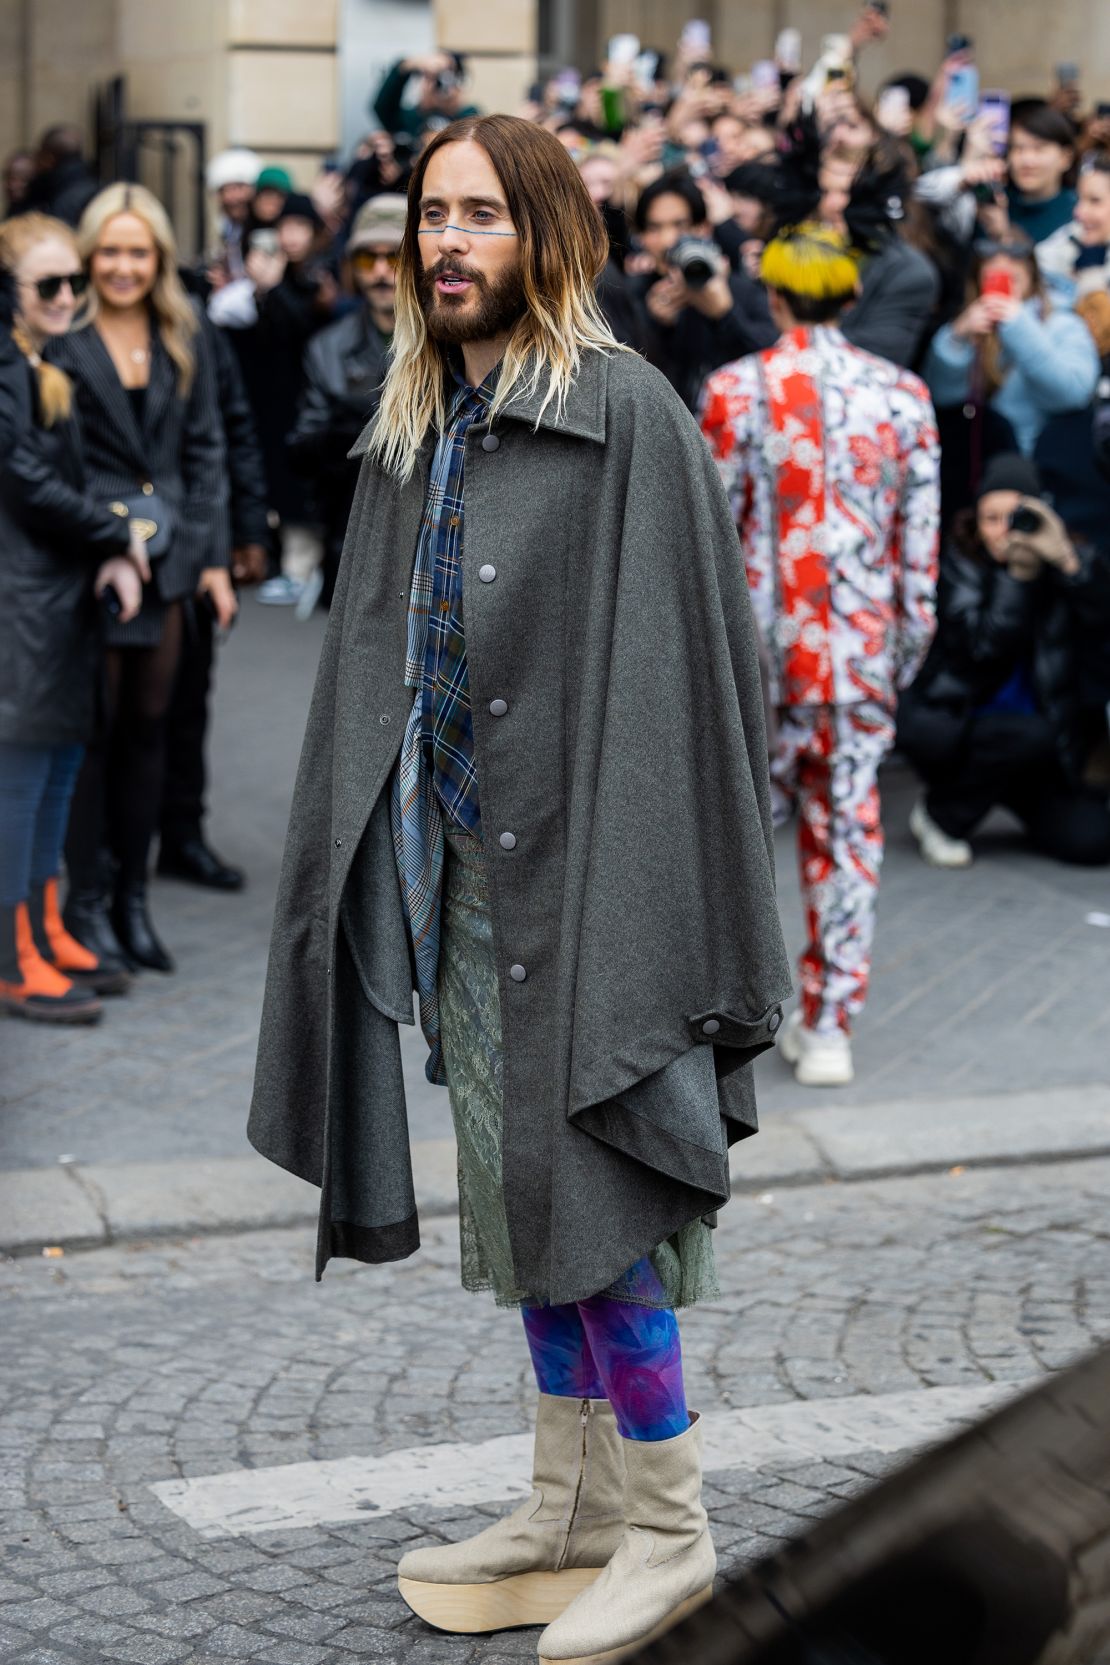 Jared Leto outside the Vivienne Westwood show on March 04, 2023.